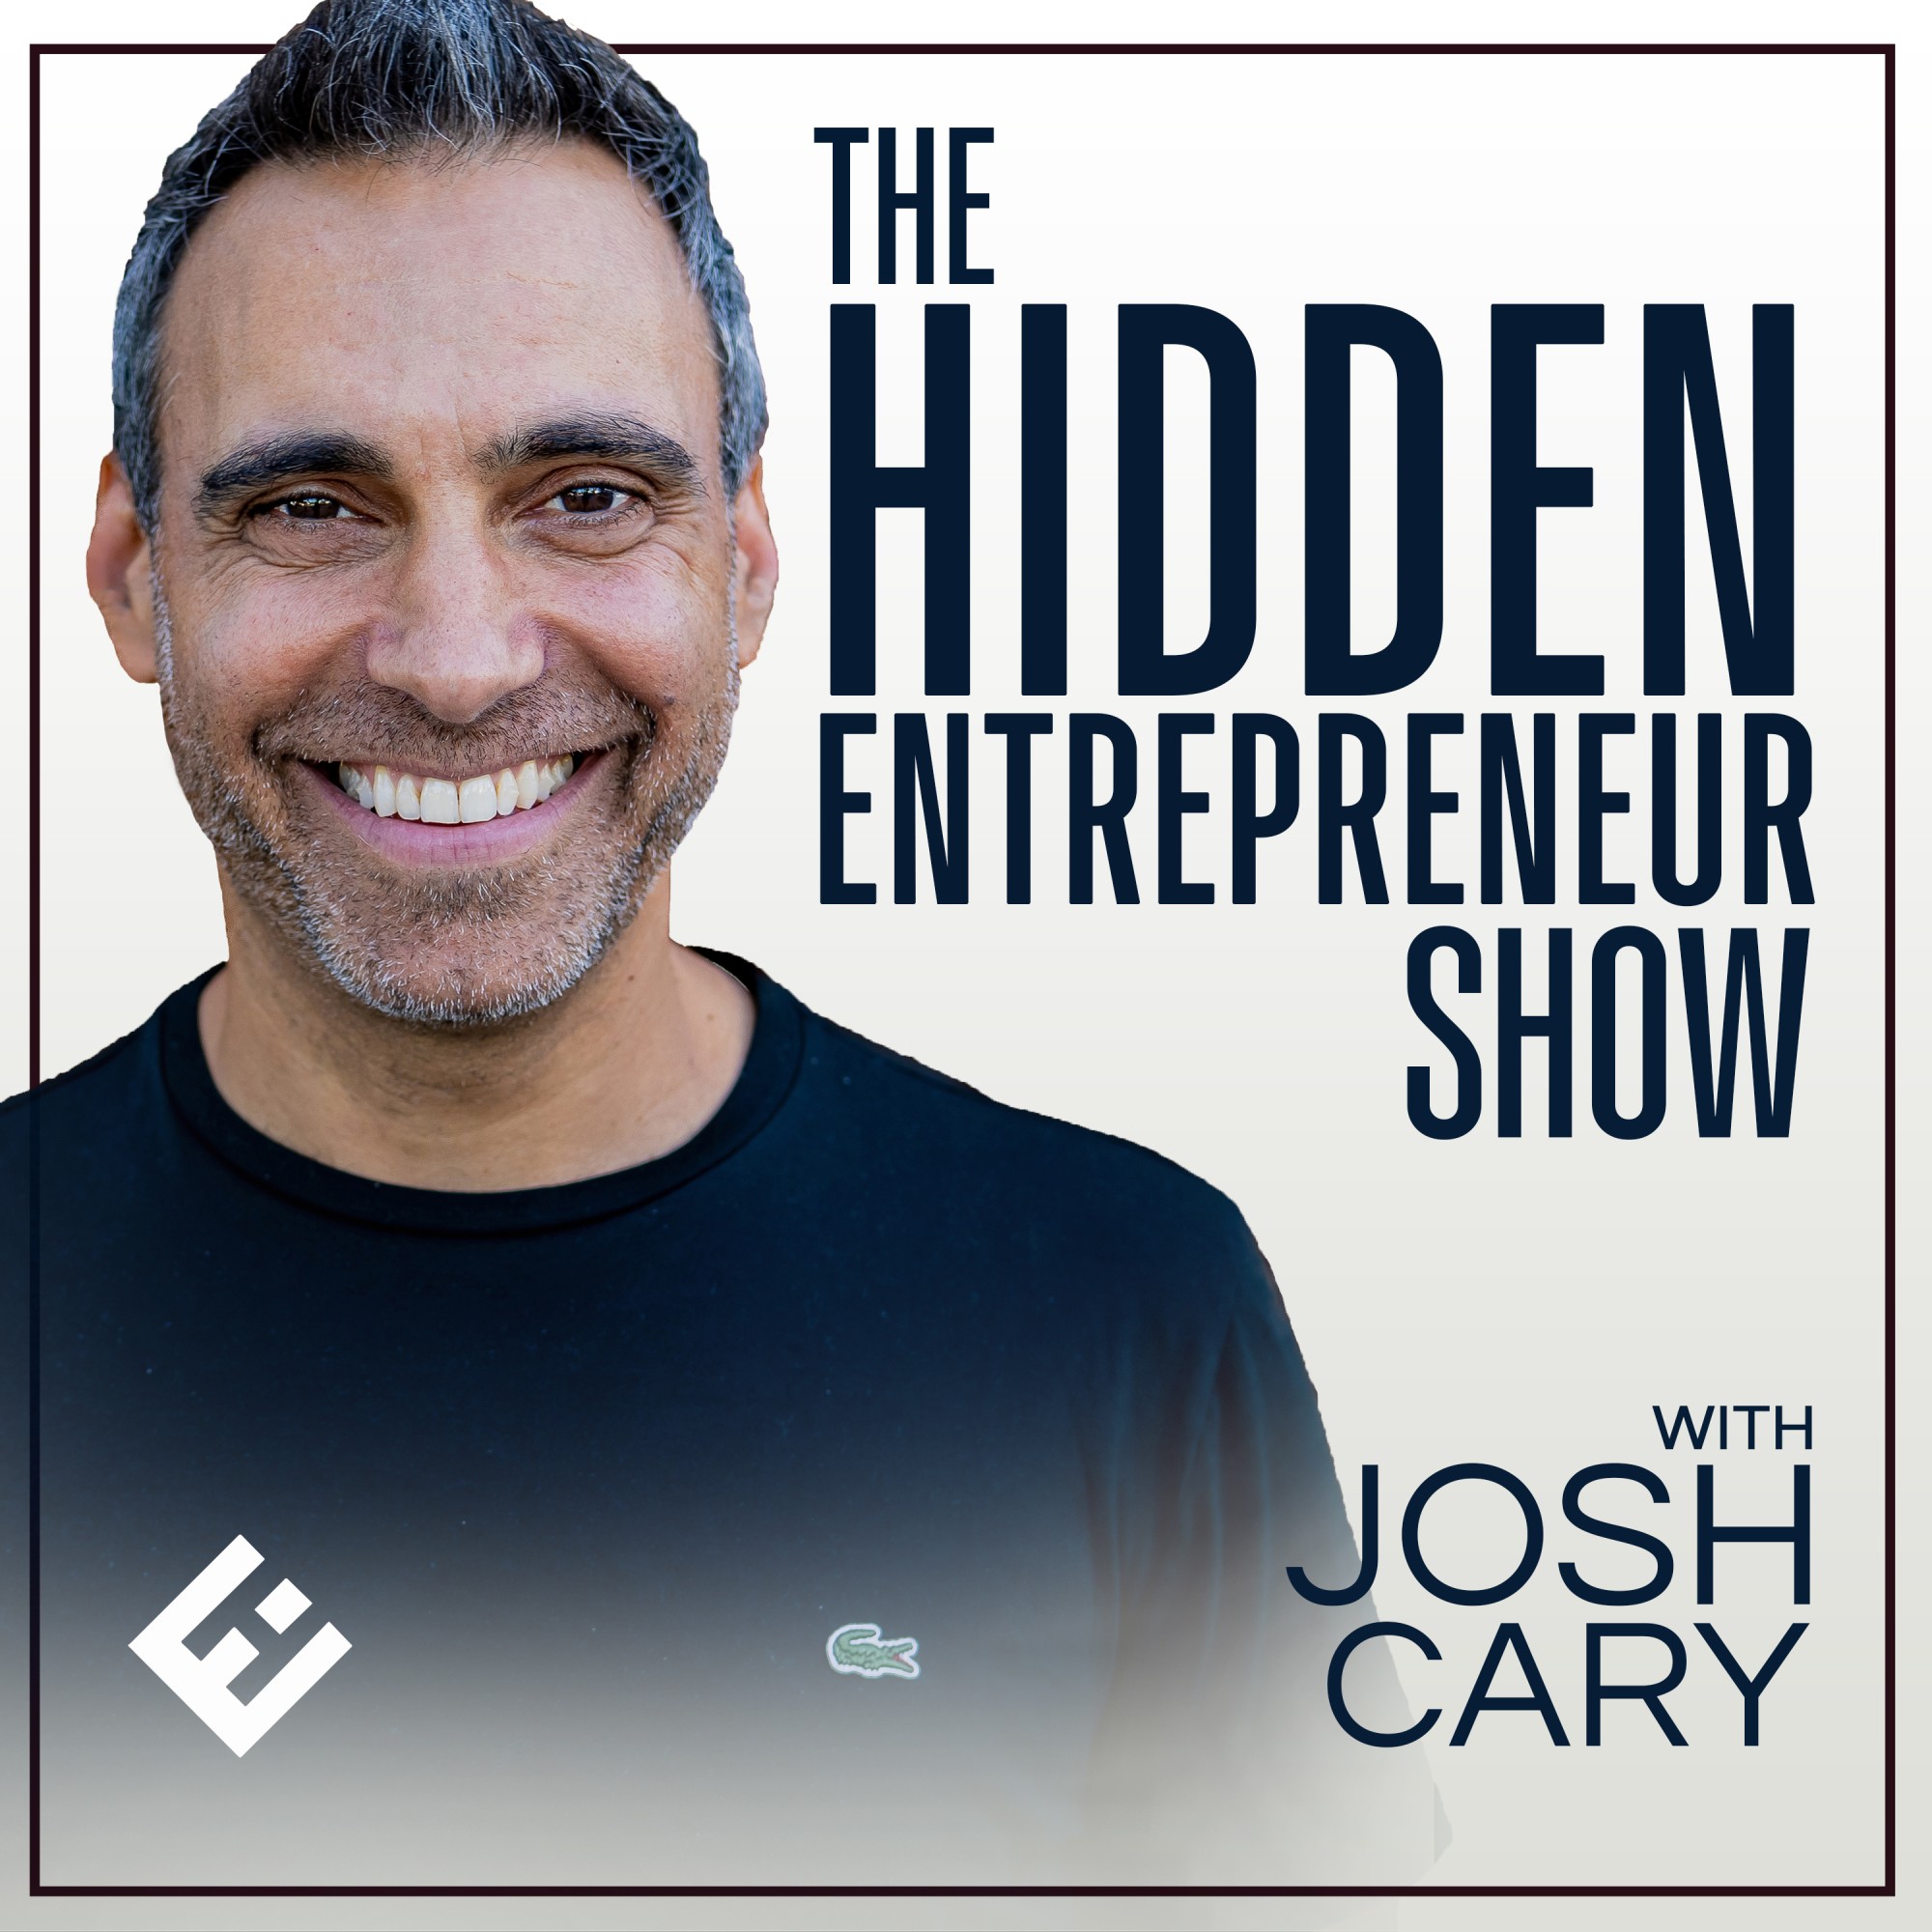 Artwork for podcast The Hidden Entrepreneur Show with Josh Cary